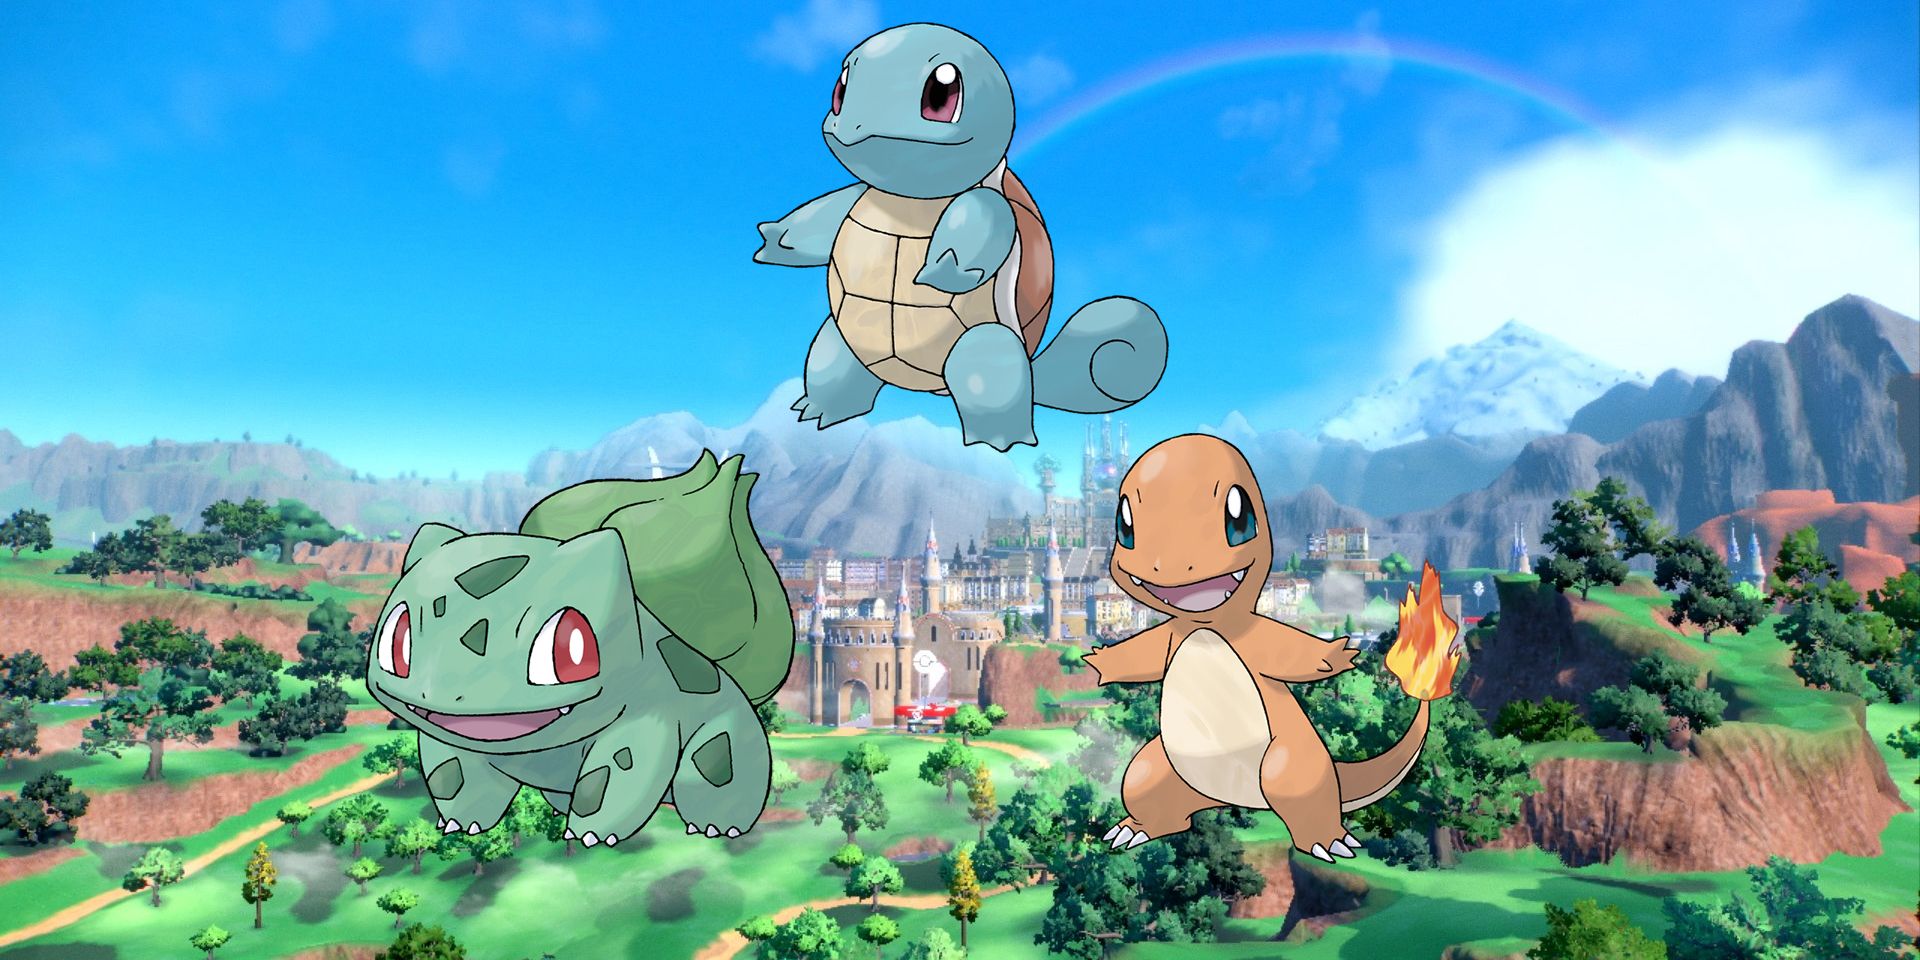 The Best Starter Type Triangles Pokemon Has Never Used Squirtle Bulbasaur and Charmander